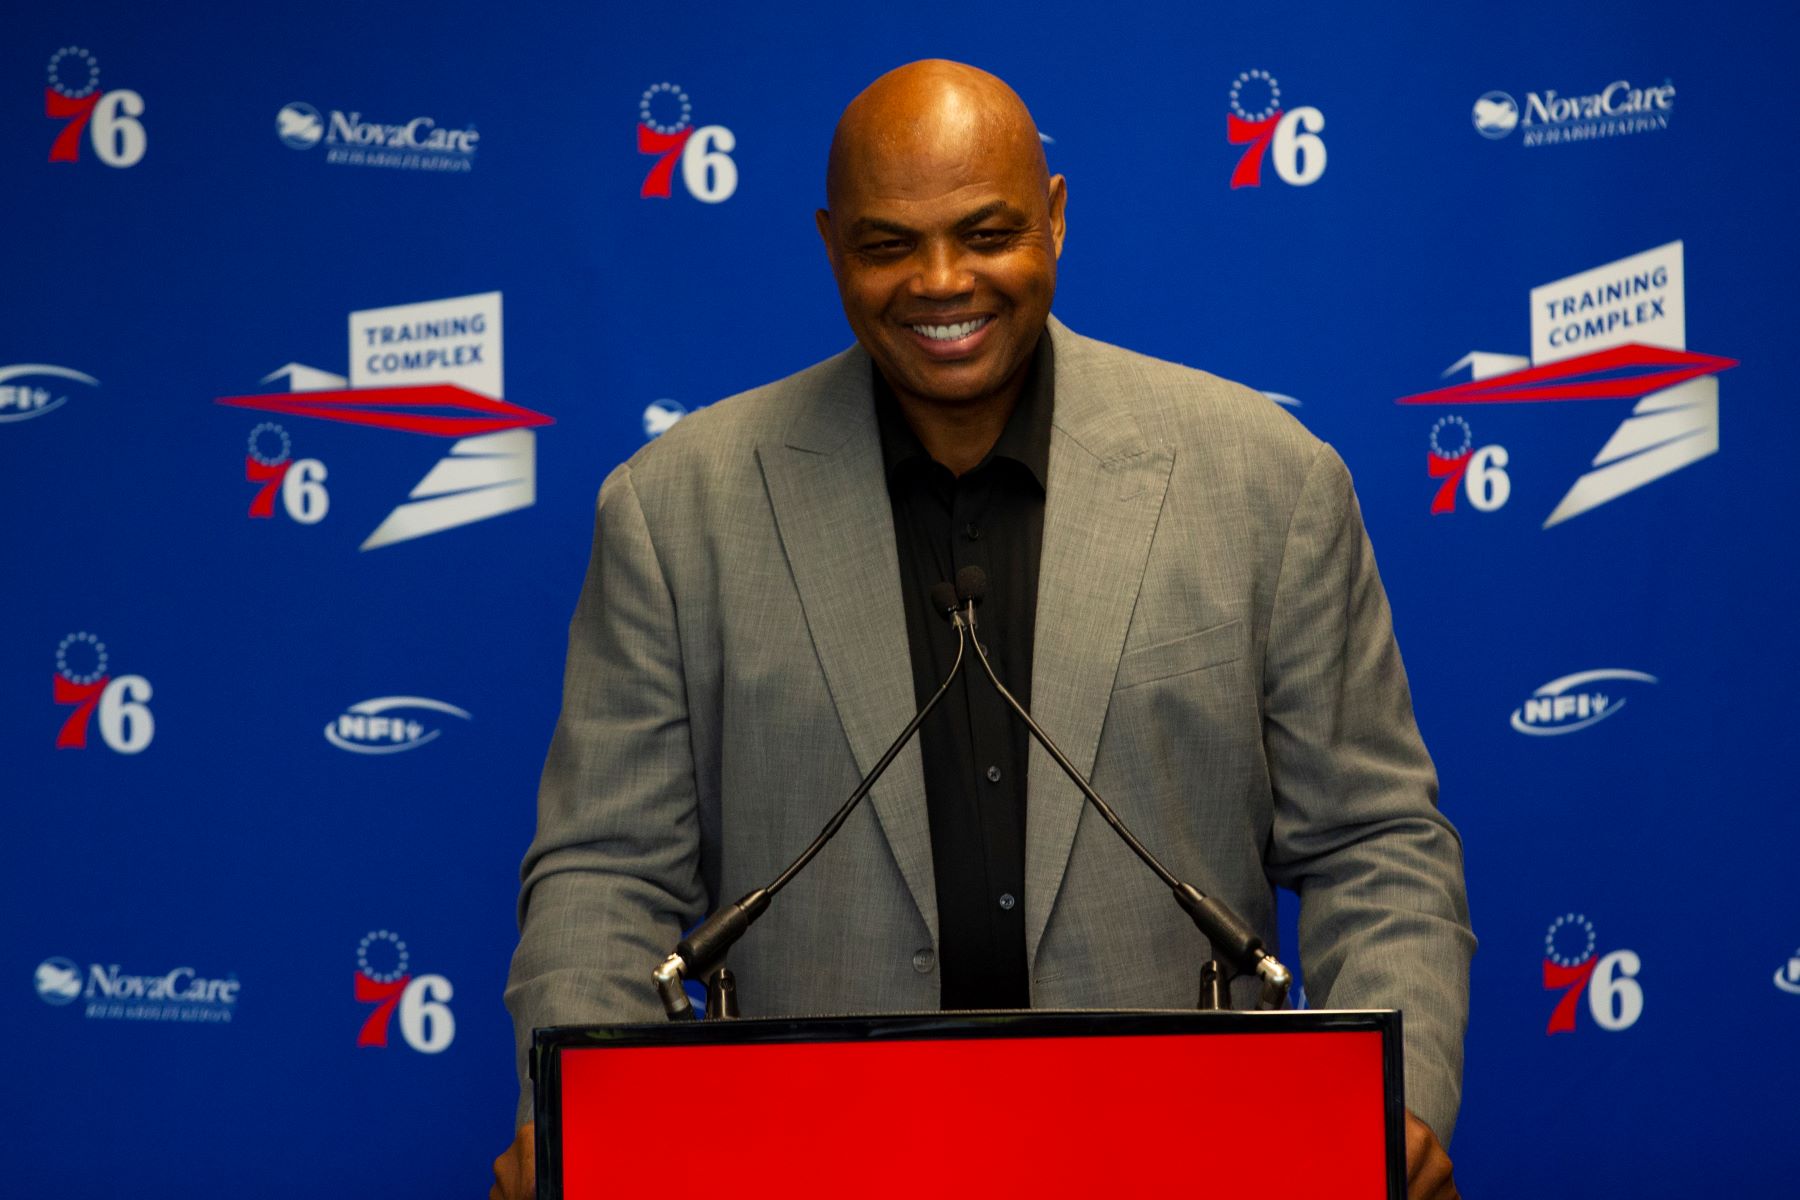 Charles Barkley speaking at the unveiling of the new Philadelphia 76ers new training facility in Camden, New Jersey